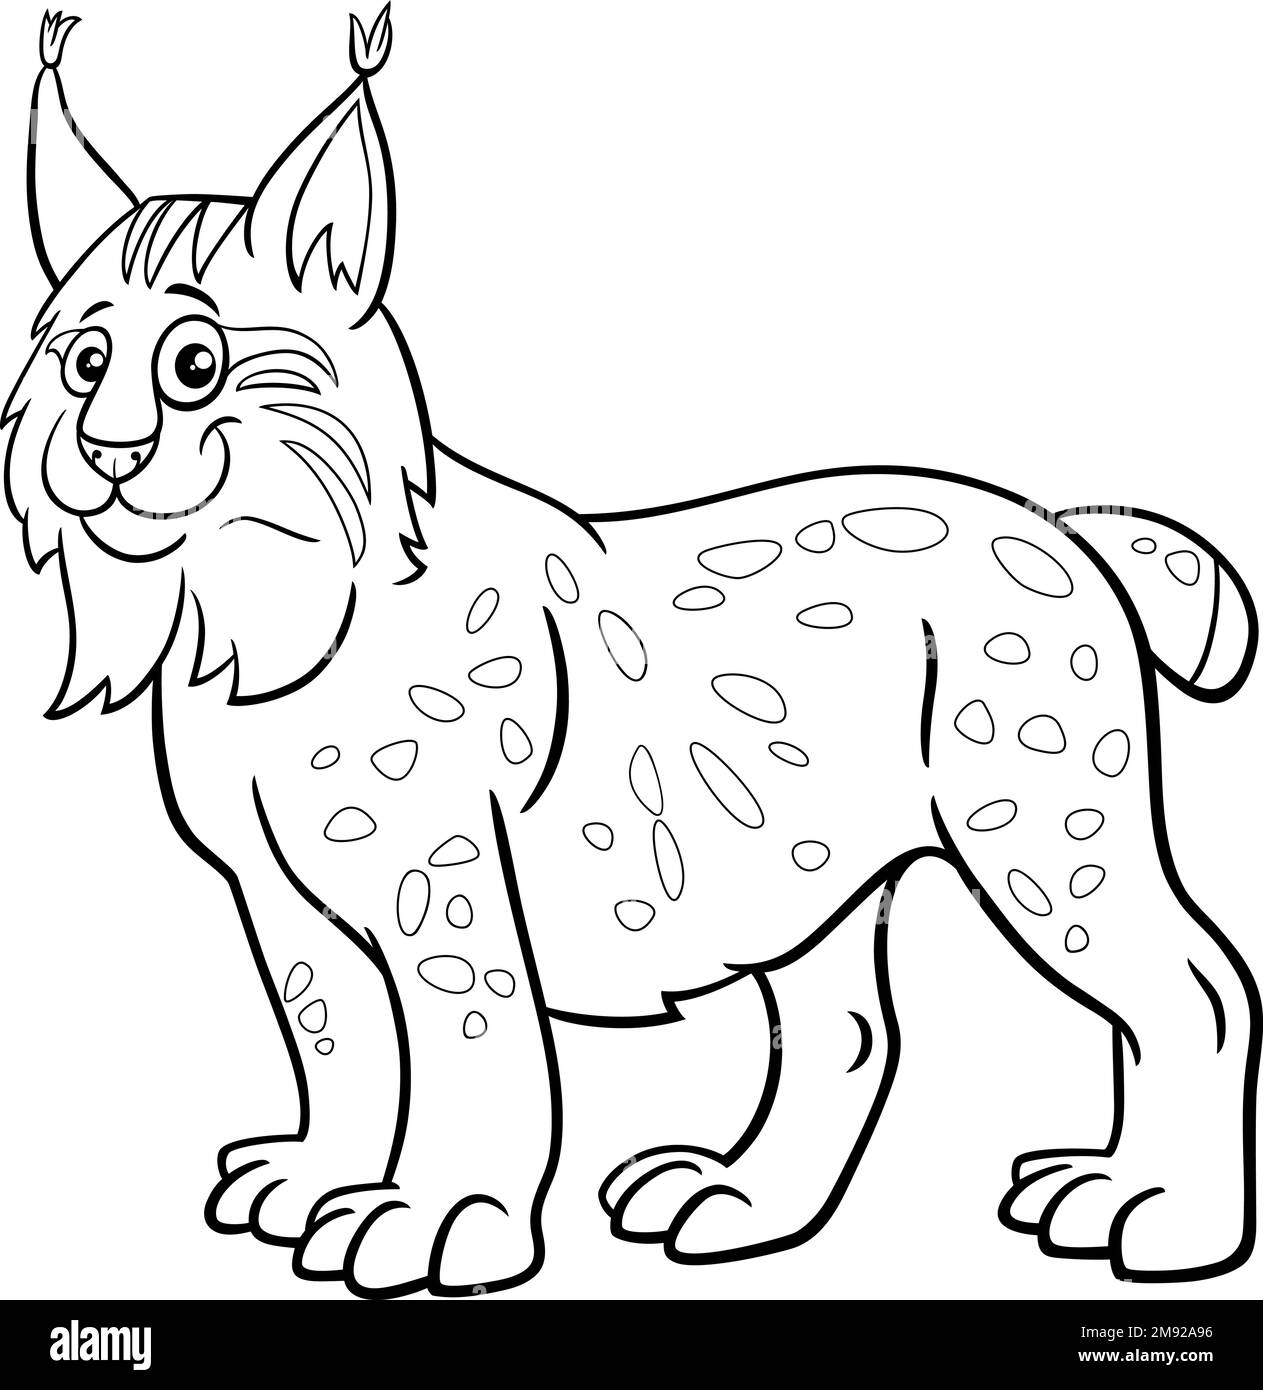 Black and white cartoon illustration of funny lynx comic wild animal character coloring page Stock Vector